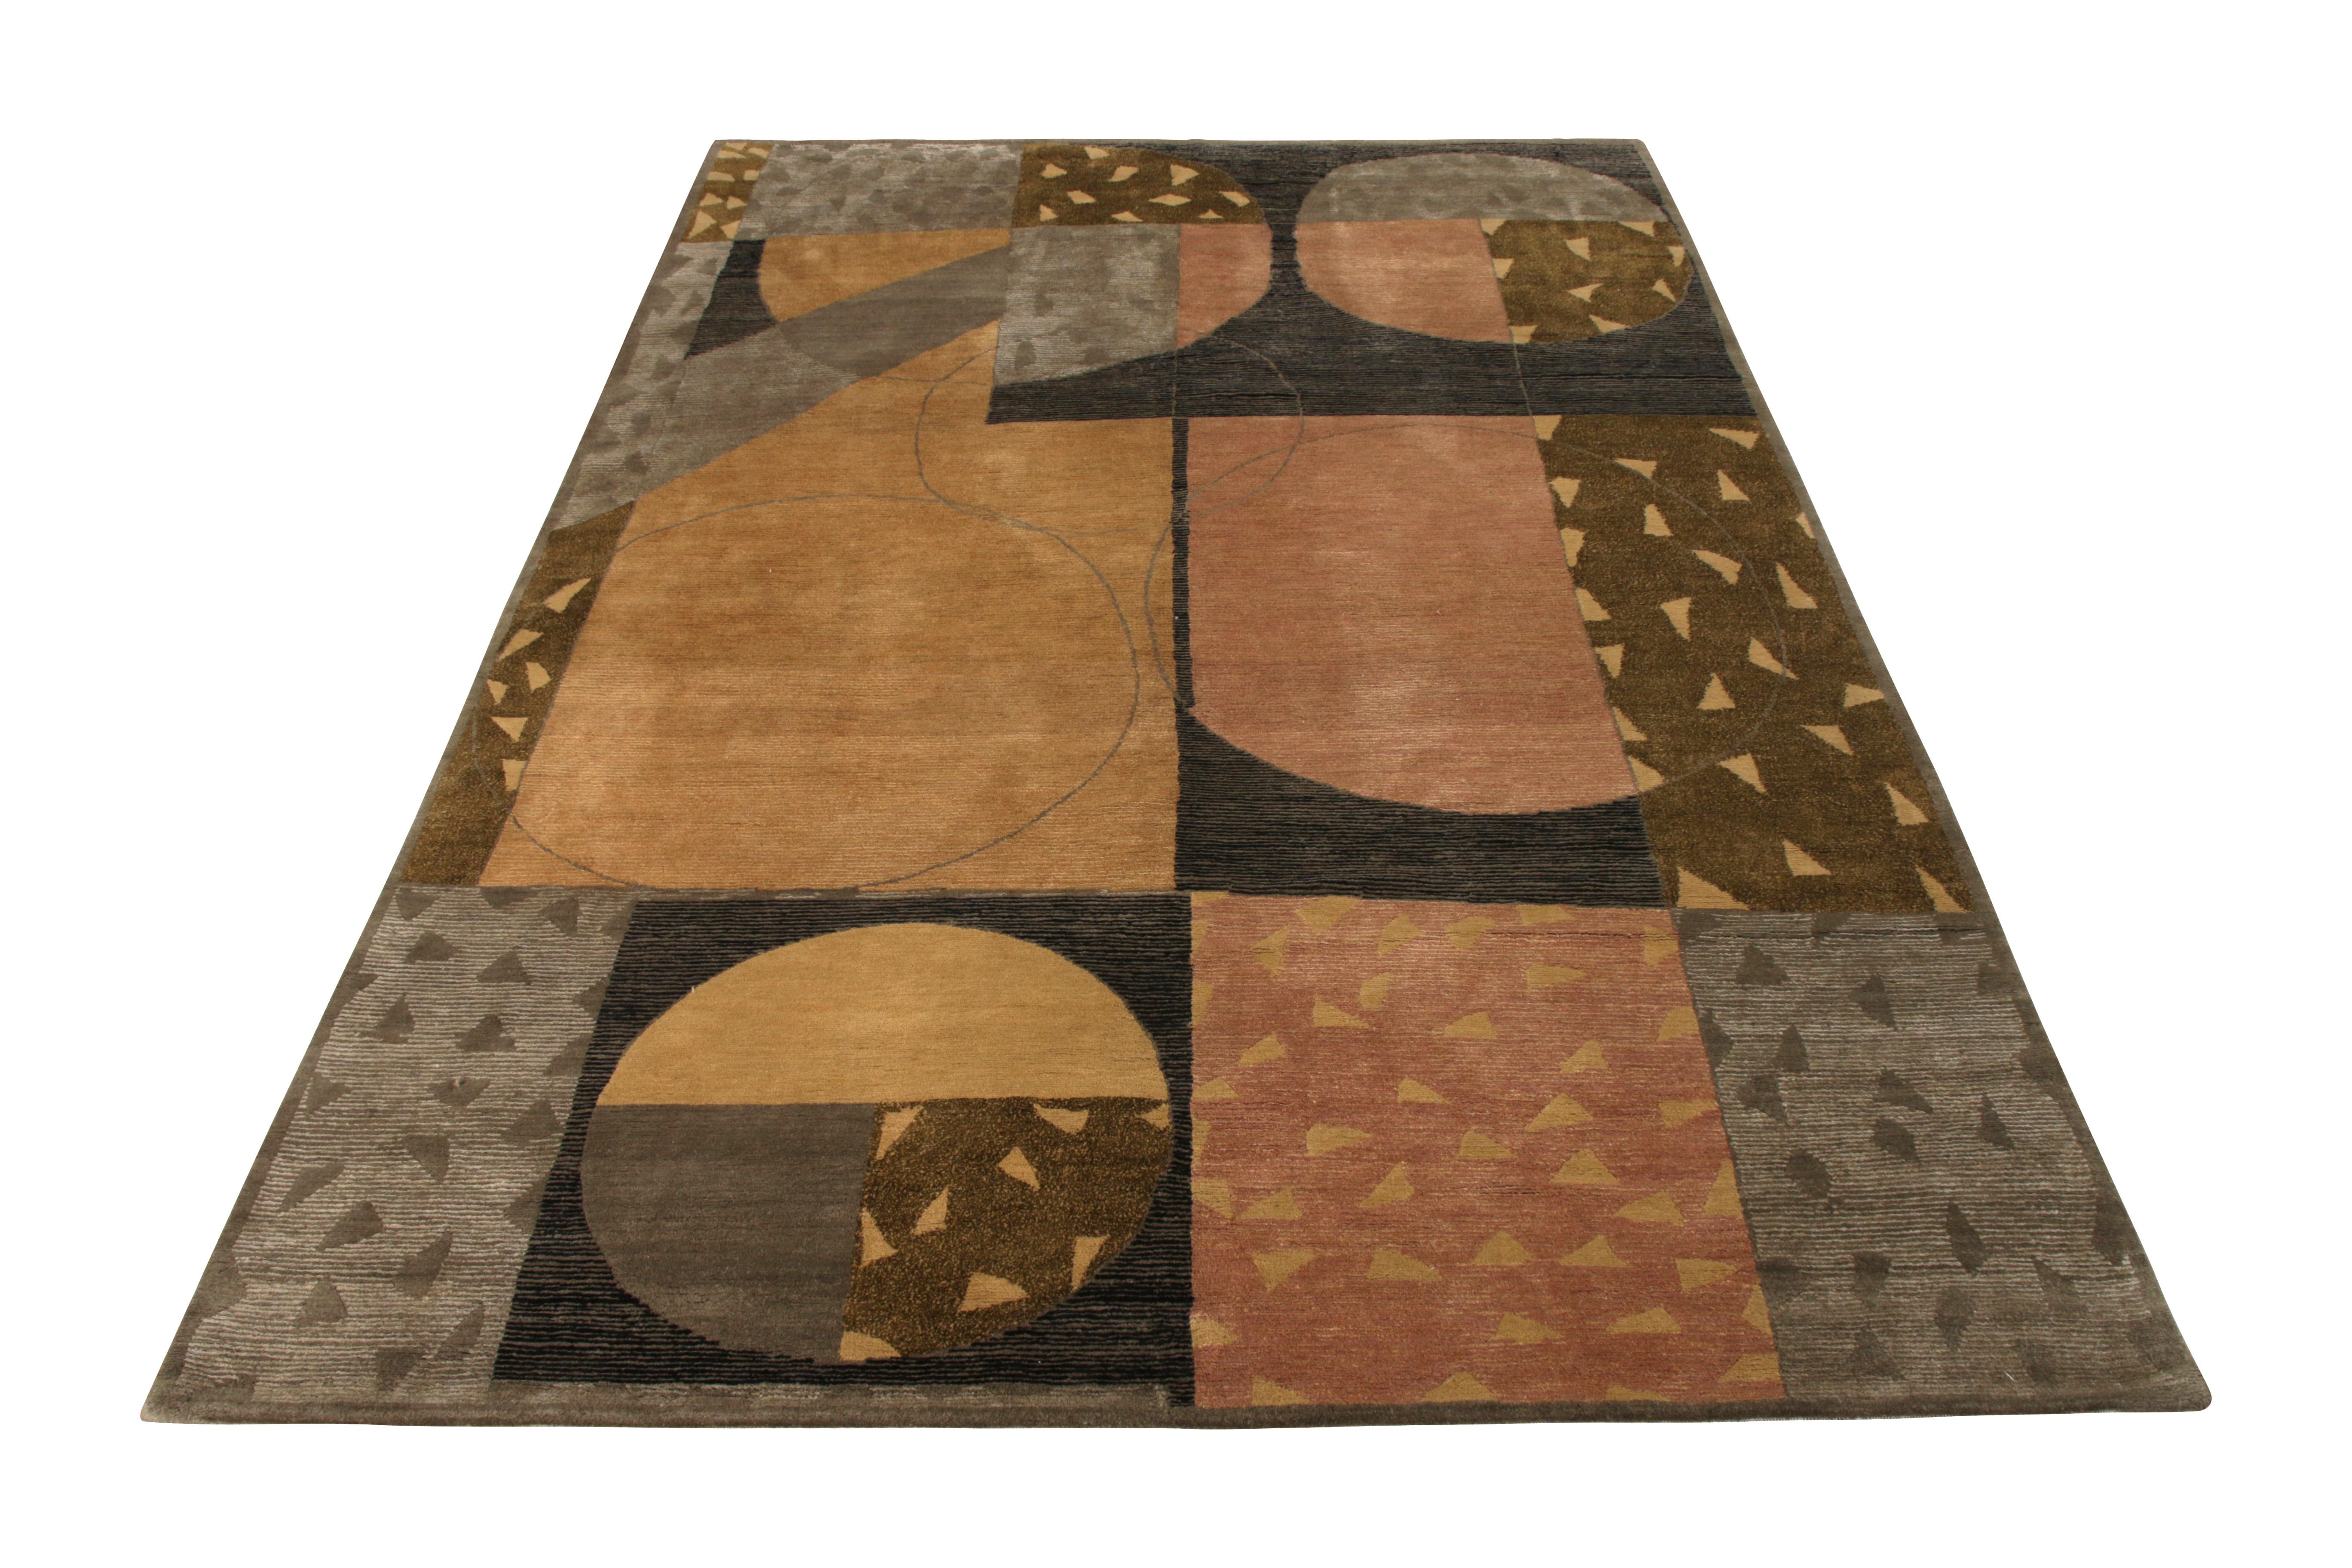 Made in unique blend of hand-knotted wool and silk, this 6x10 modern rug is a unique addition to the Modern Classics rug collection by Rug & Kilim, with this particular geometric rug drawing inspiration from French Art Deco rug styles. 

On the